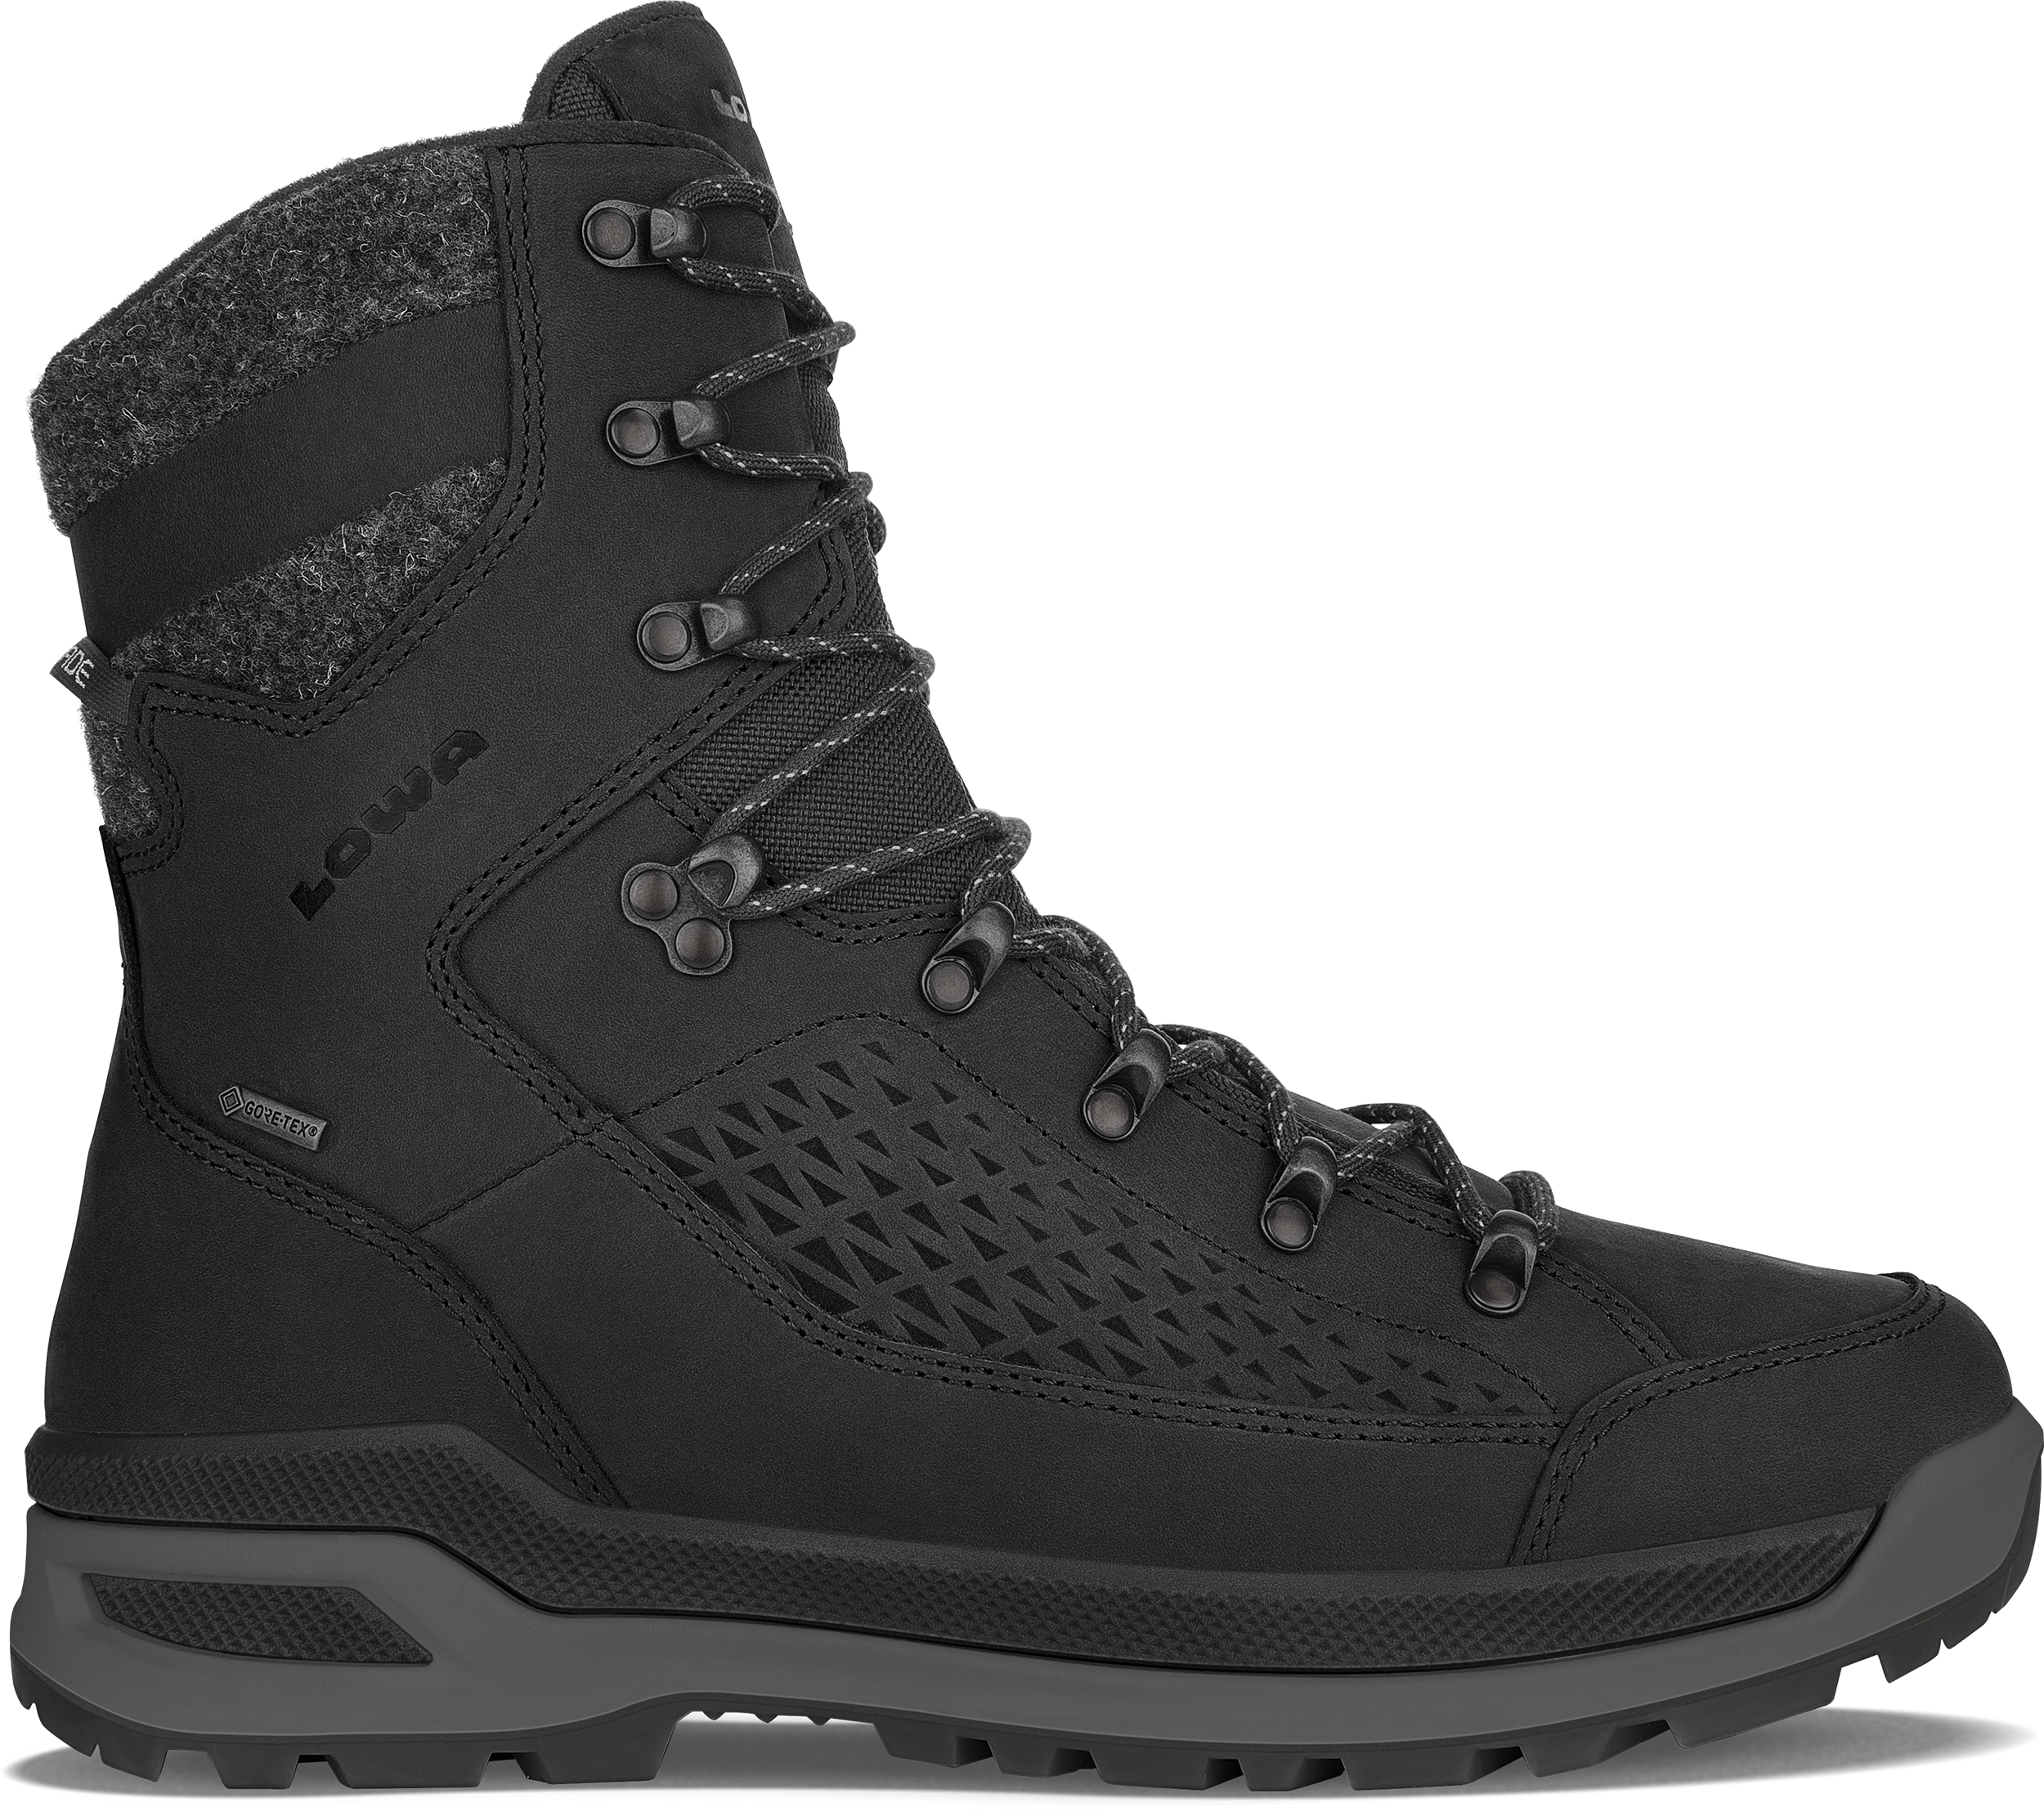 RENEGADE ICE COLD WEATHER BOOTS for men LOWA FI